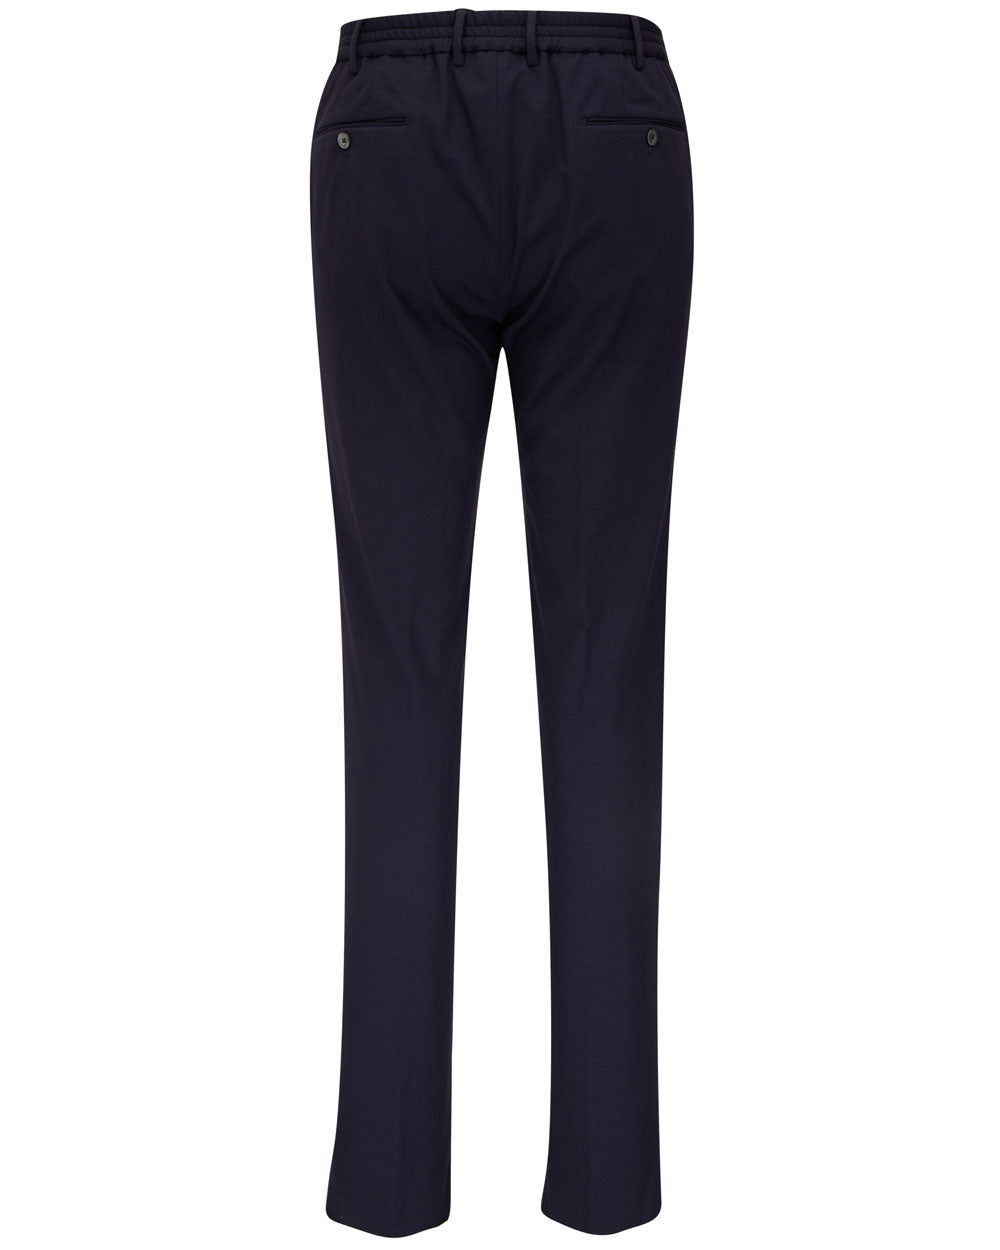 Techno Jersey Slim Fit Pant in Navy